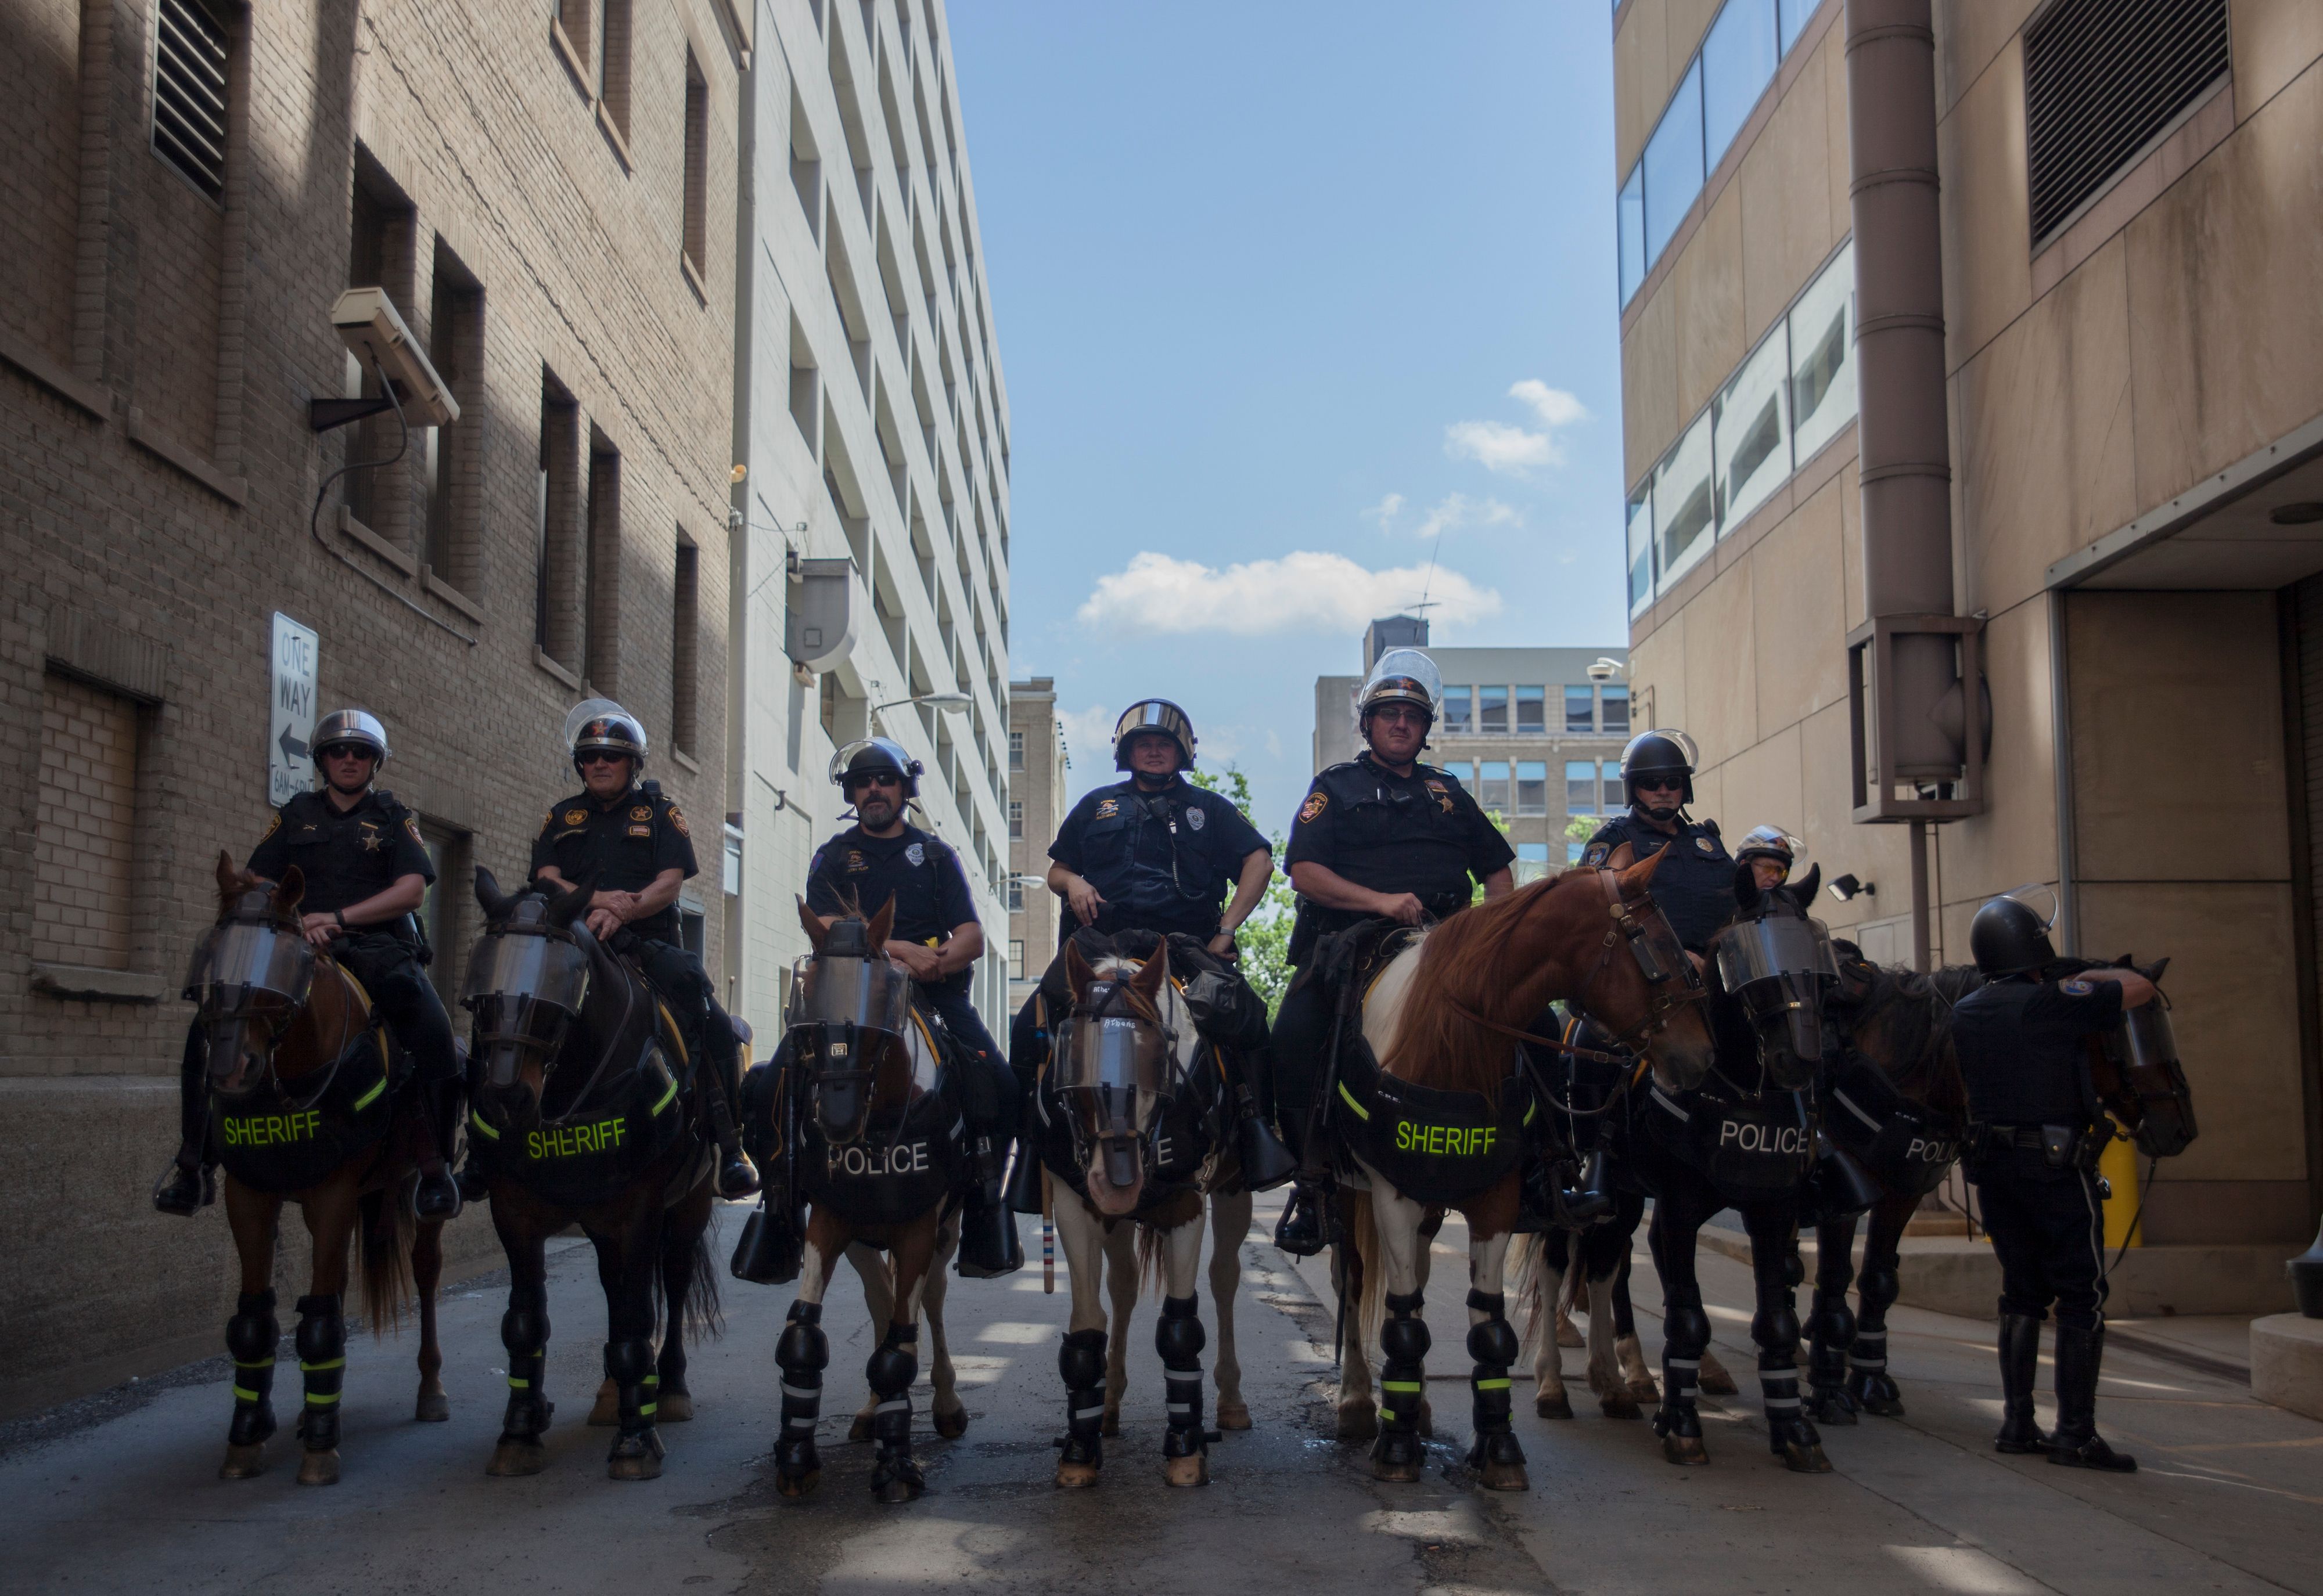 A mounted police unit waits in a staging area as a small group from the KKK-affiliated Honorable Sacred Knights gather for a rally in Dayton, Ohio, May 25, 2019. (SETH HERALD/AFP/Getty Images)